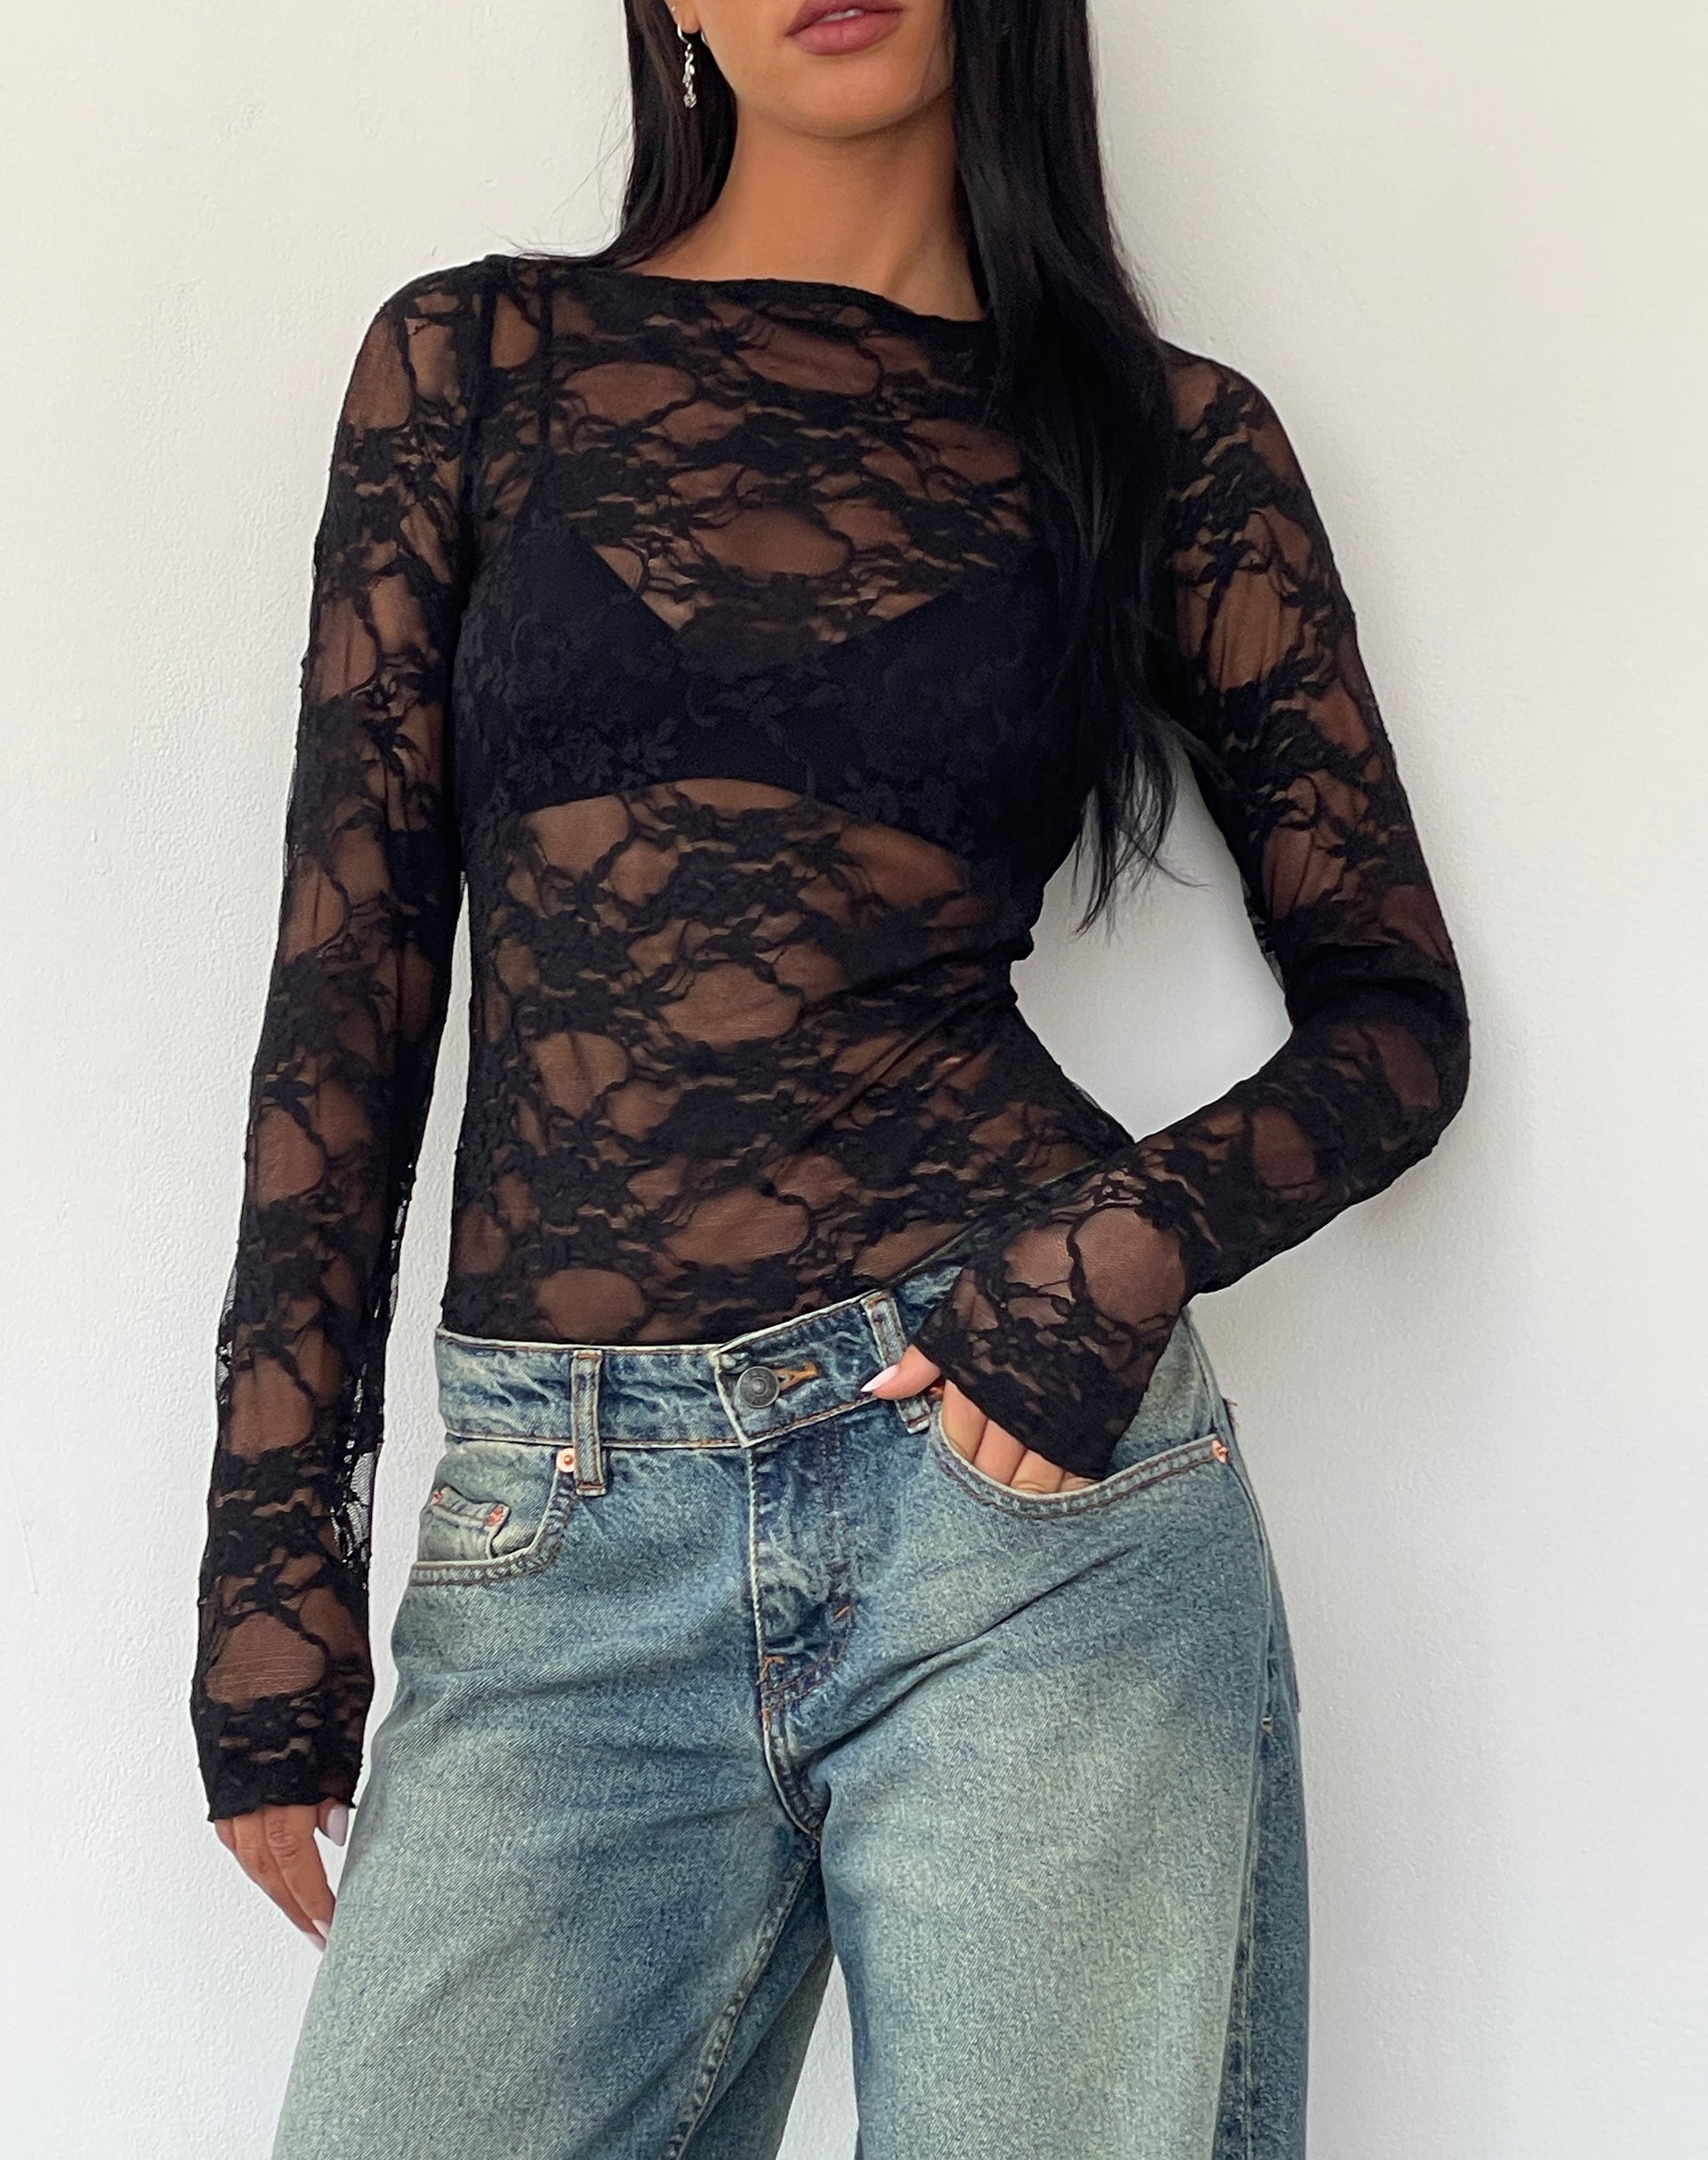 https://us.motelrocks.com/cdn/shop/files/GRIZELDA-TOP-ABSTRACT-LACE-BLACK-_-ROOMY-EXTRA-WIDE-LOW-RISE-JEANS-EXTREME-BLUE-GREEN.jpg?crop=center&height=2428&v=1698319083&width=1920